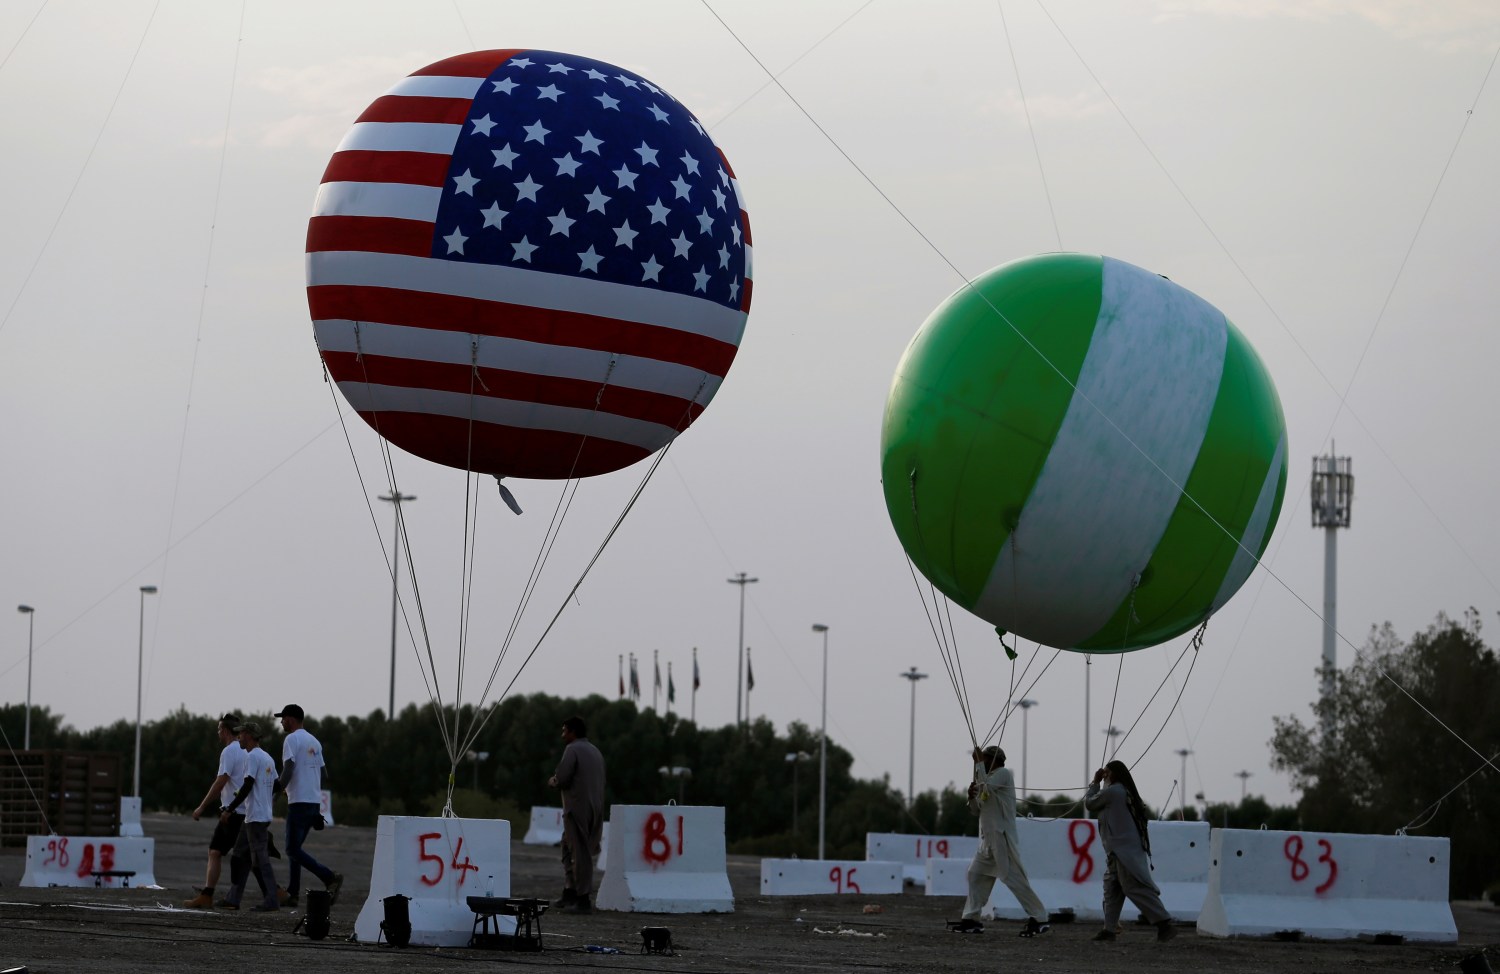 Balloons with US and Saudi flags